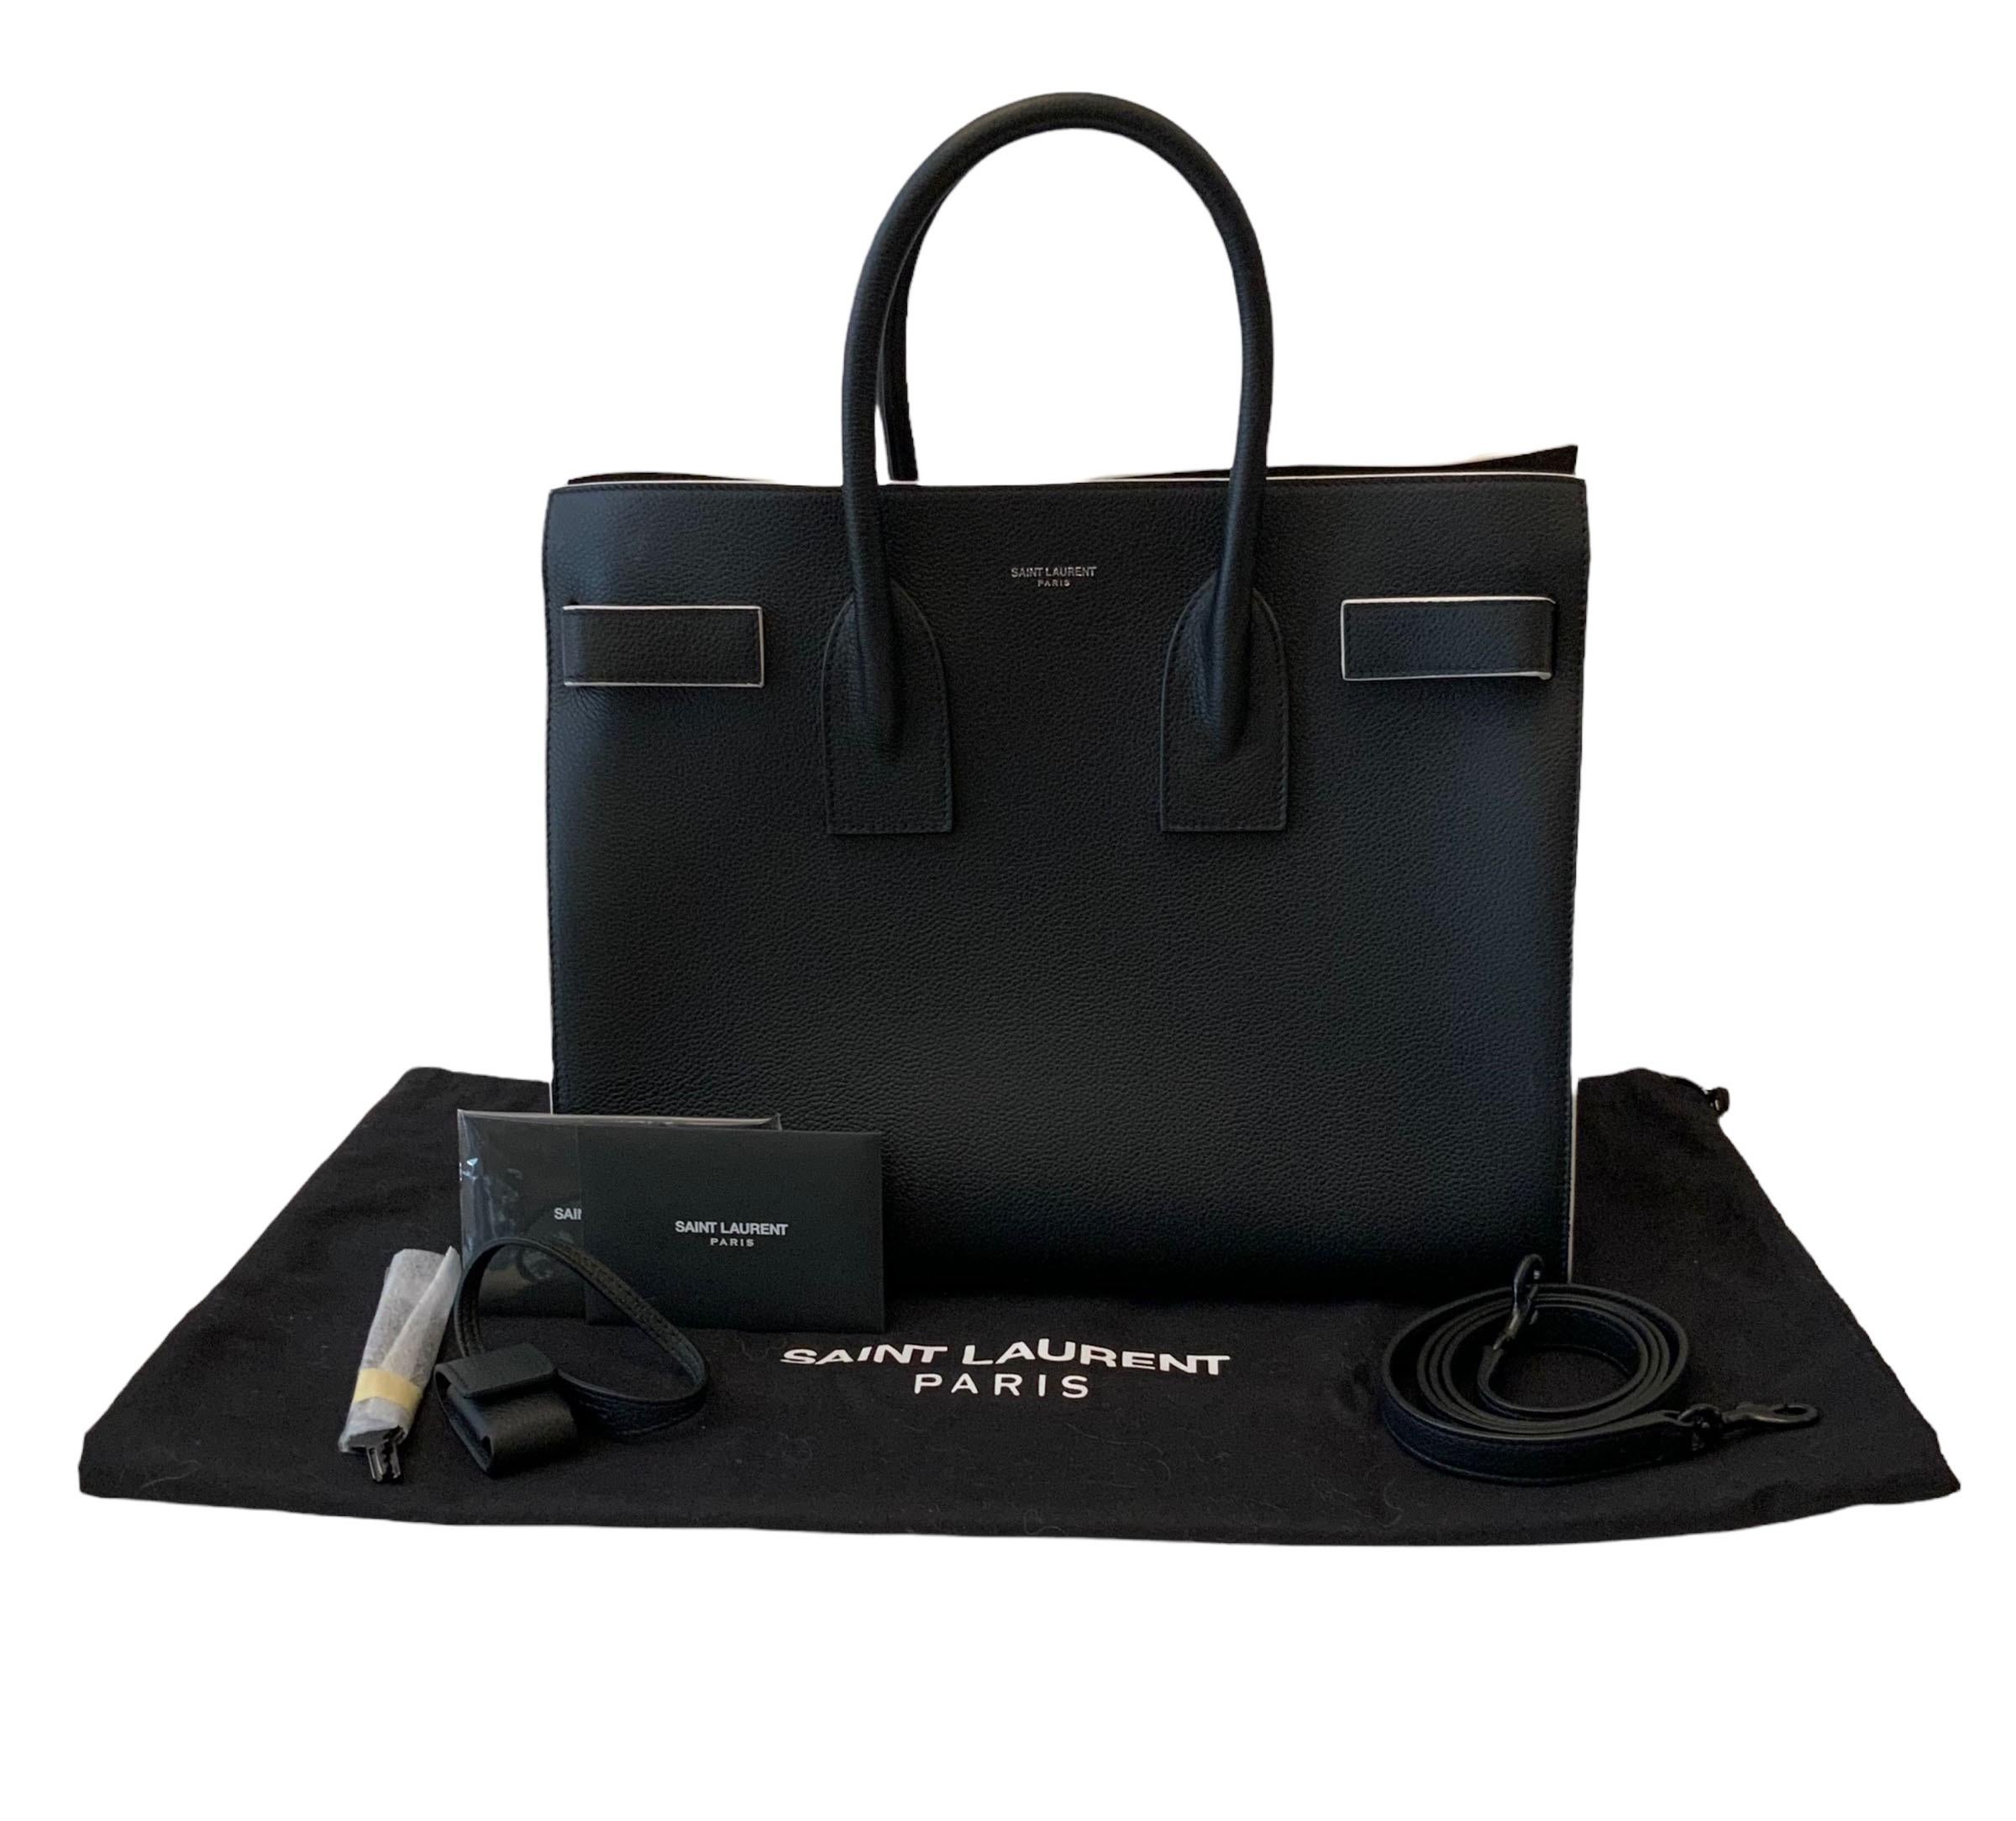 This pre-owned but in very good condition is a signature bag from the house of Saint Laurent.
It is crafted in a black smooth calfskin leather and white trim all around.
It features tubular handles, accordion sides with a compression strap with tabs